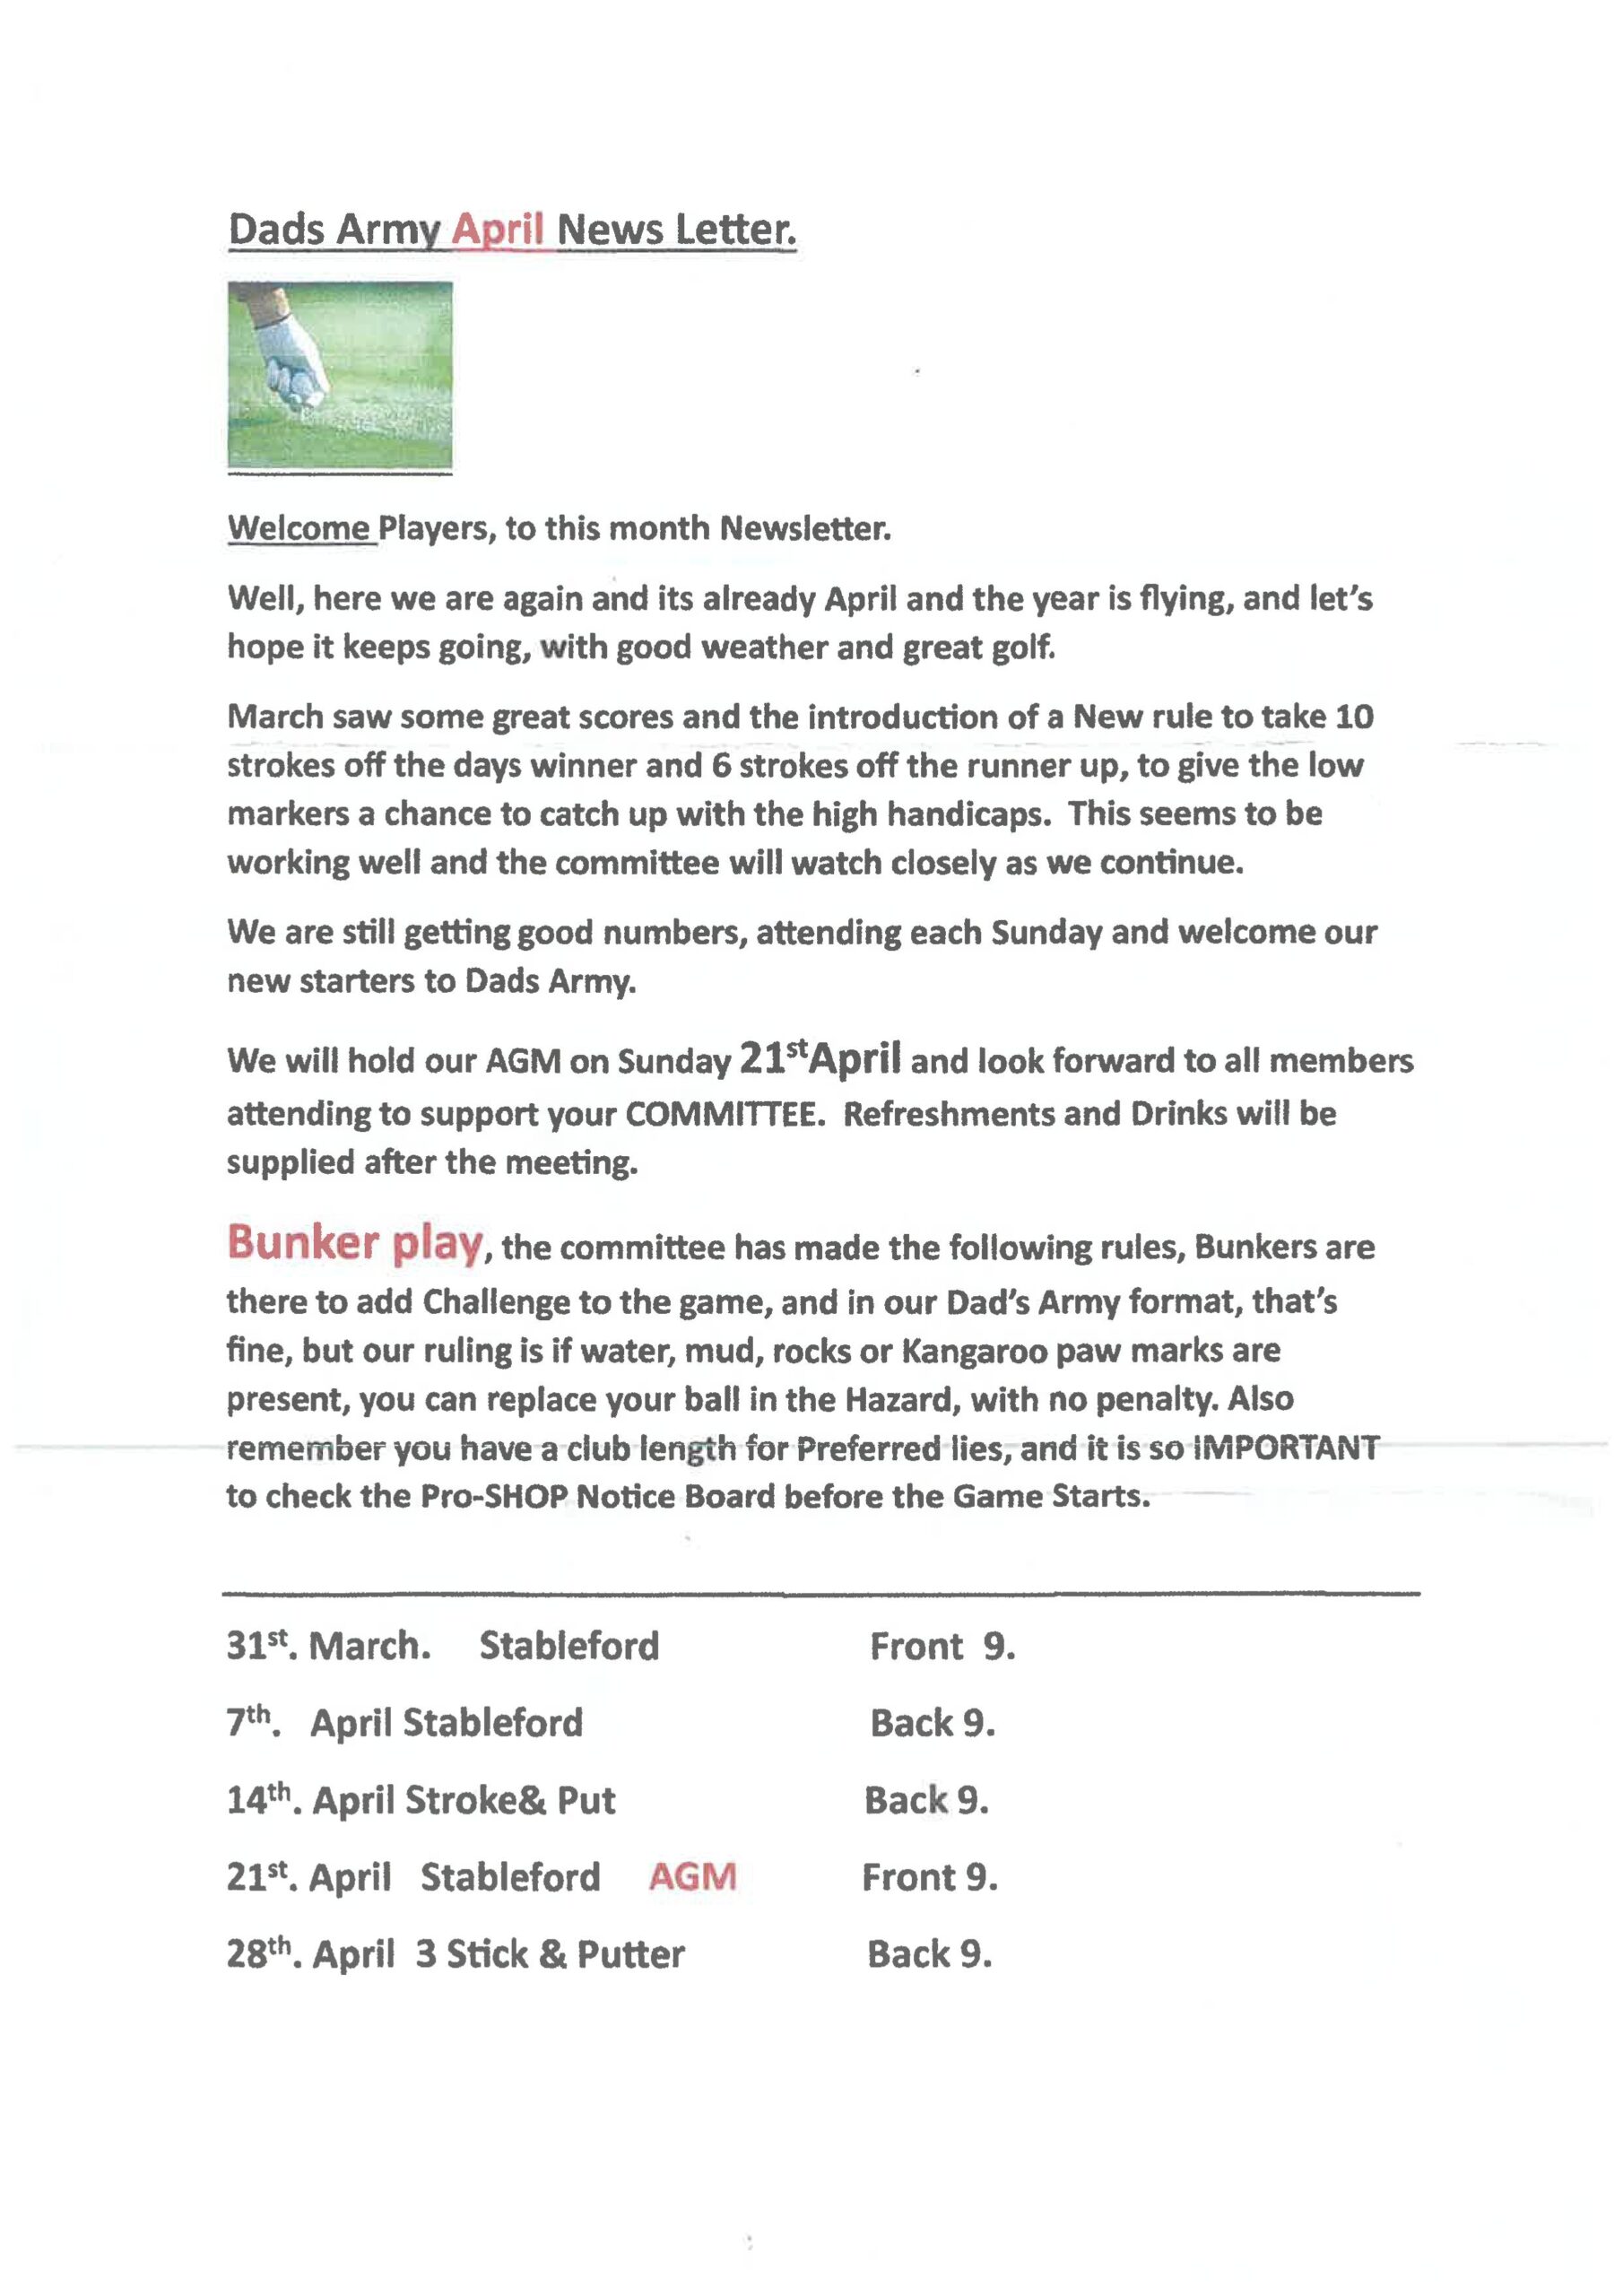 Dads Army golf newsletter April